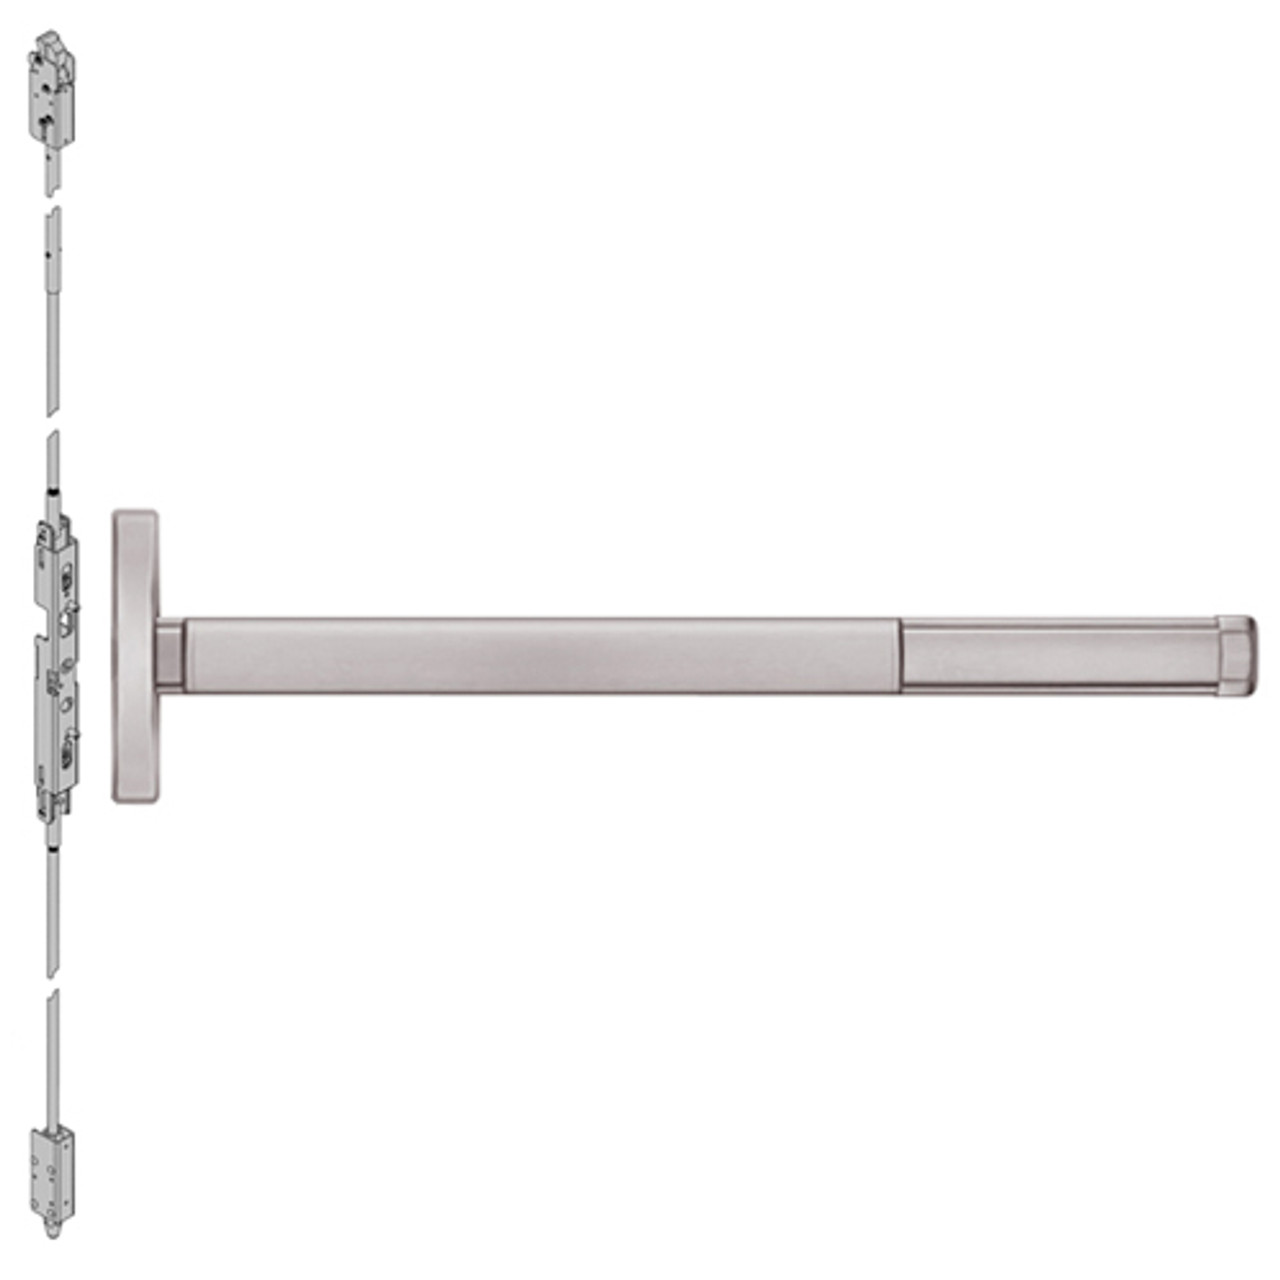 DE2603LBR-628-36 PHI 2600 Series Concealed Vertical Rod Exit Device with Delayed Egress Prepped for Key Retracts Latchbolt in Satin Aluminum Finish